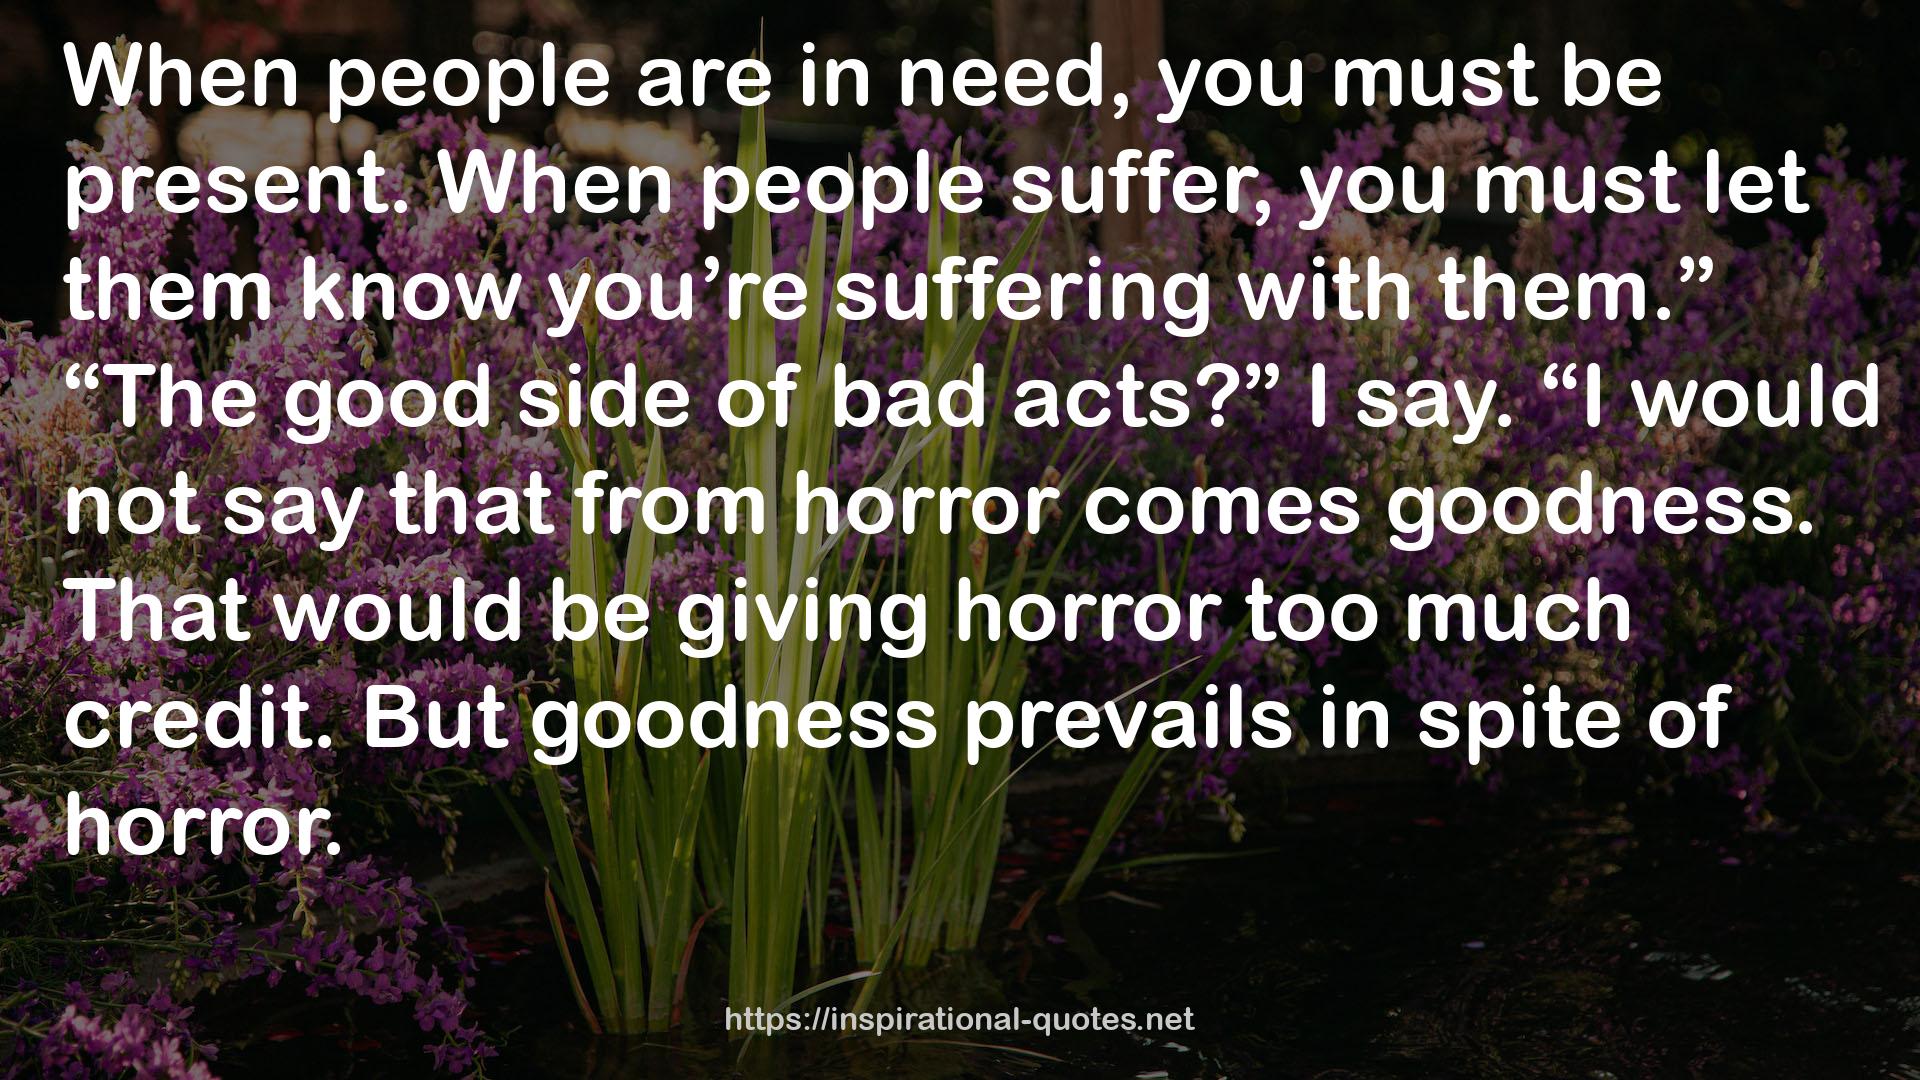 “The good side  QUOTES